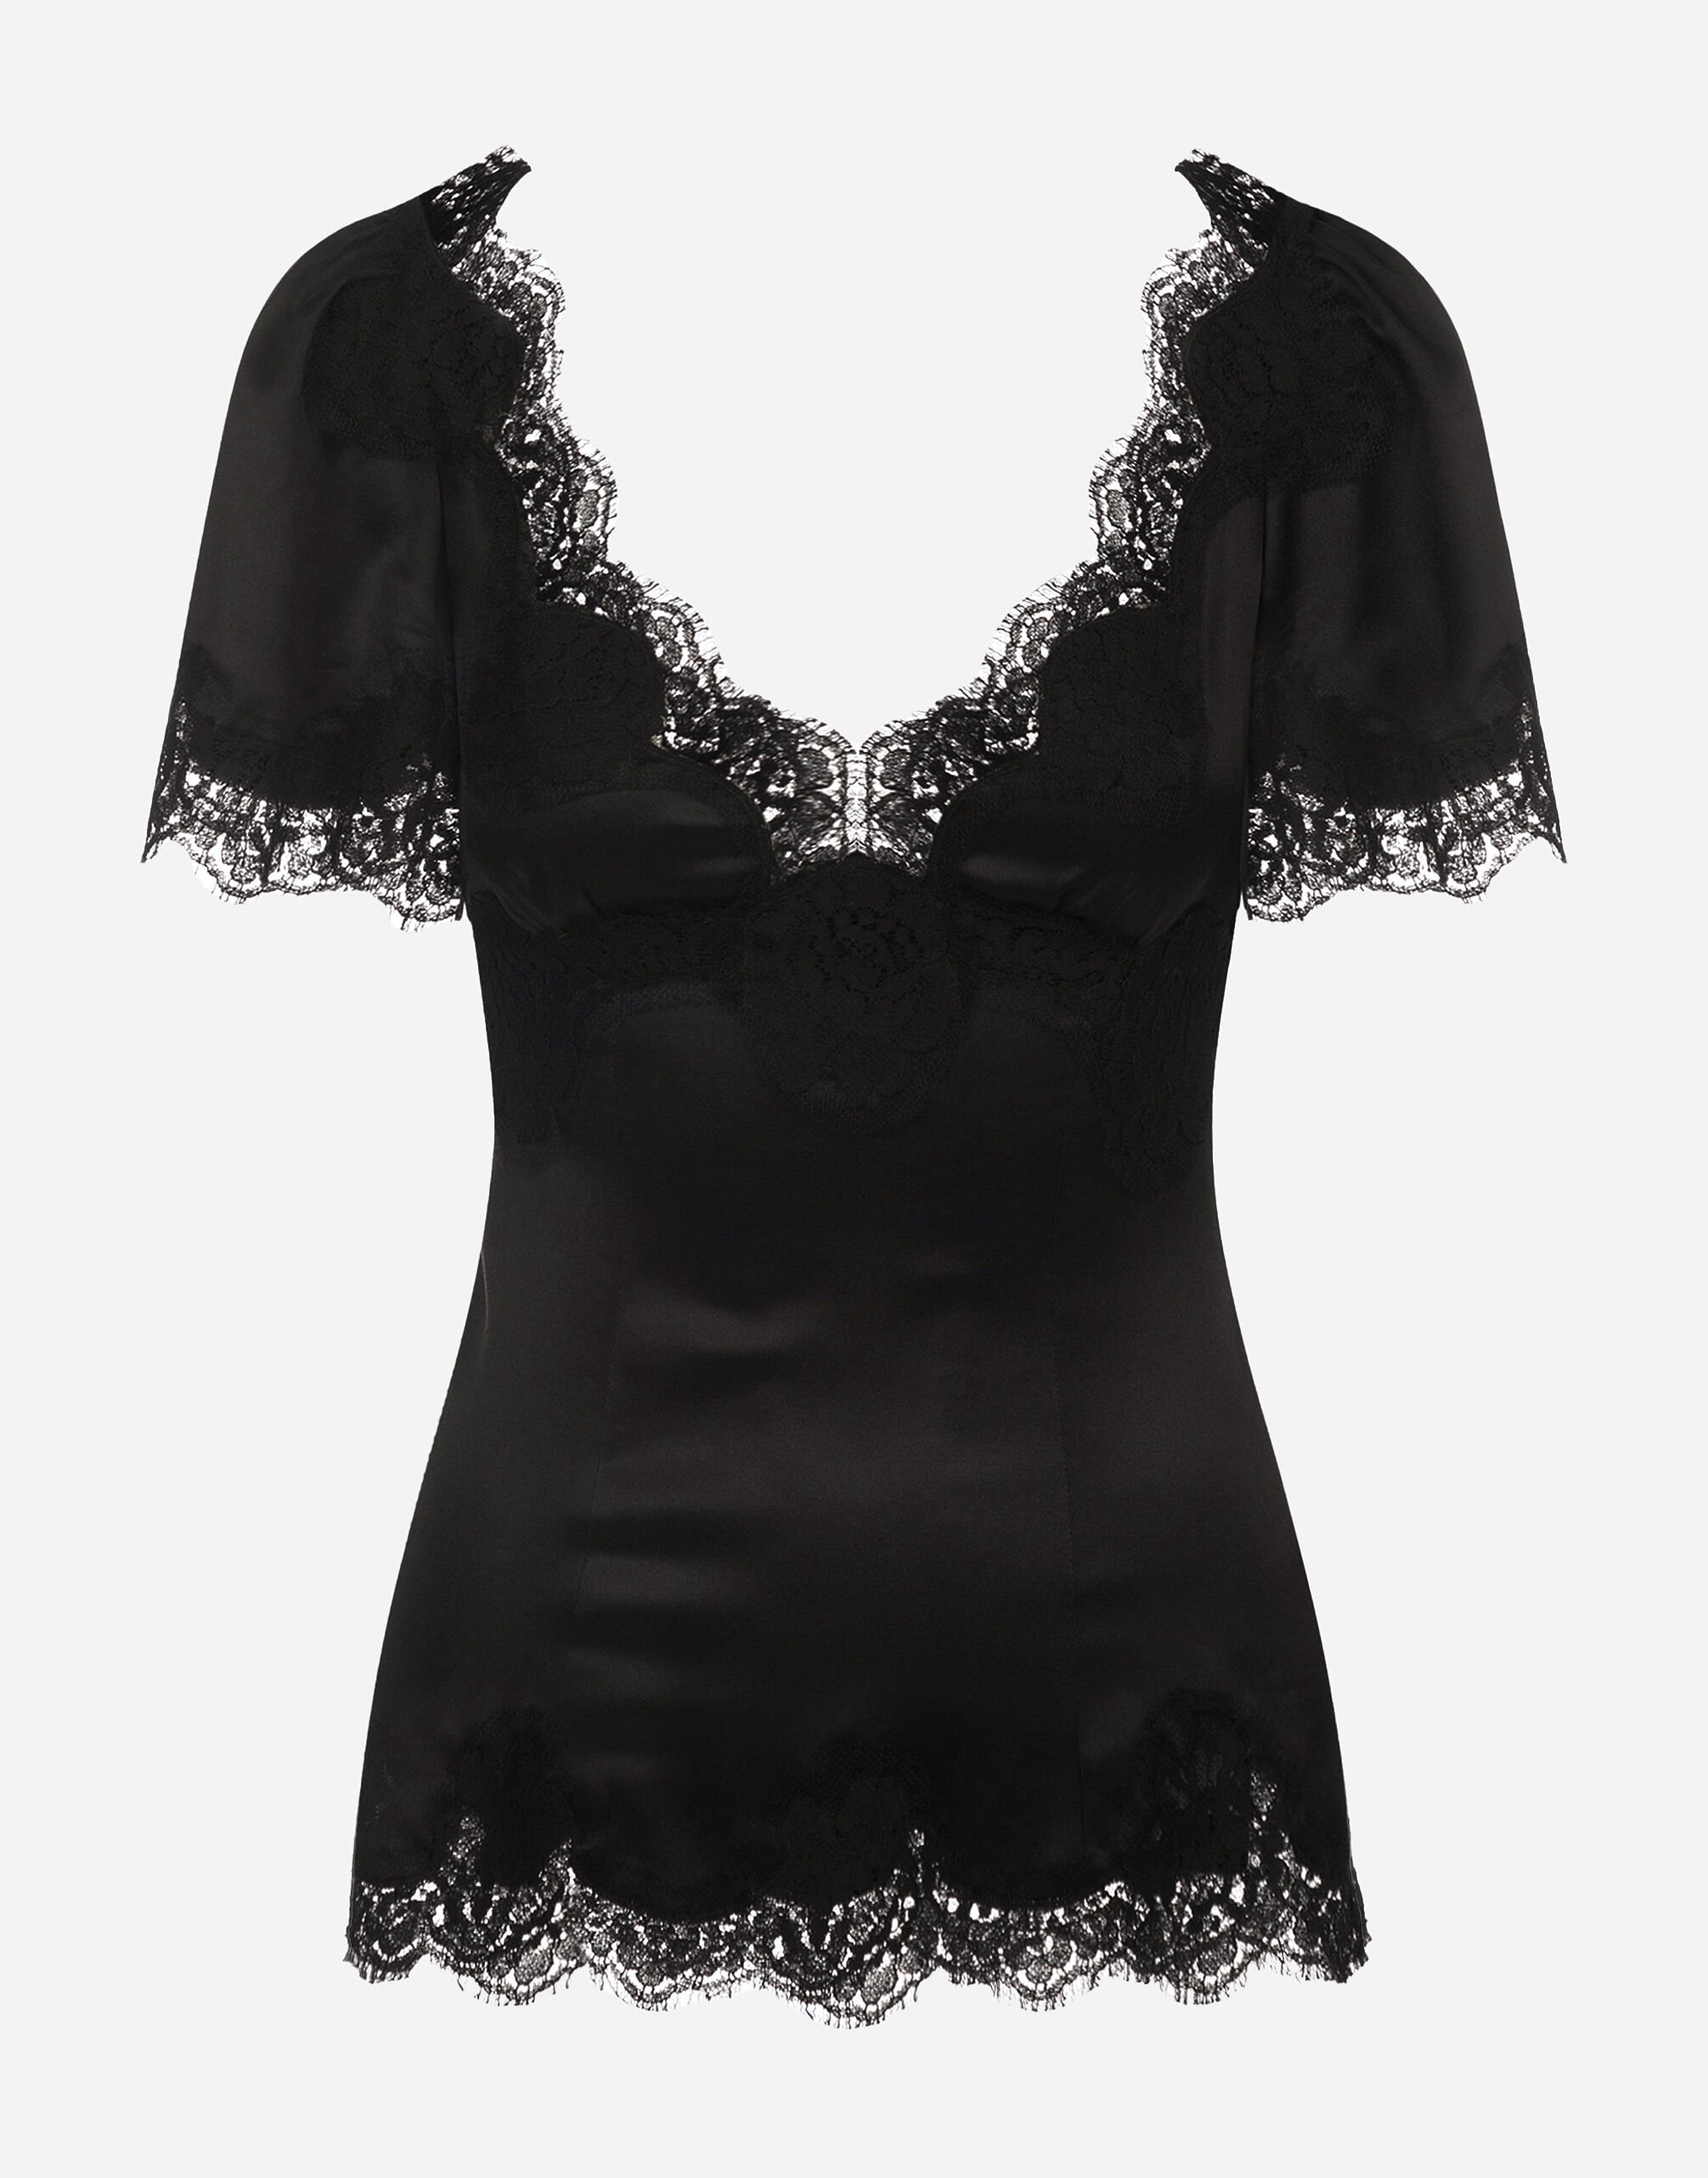 Dolce & Gabbana Satin top with lace details Black F6H8XTFR2XI